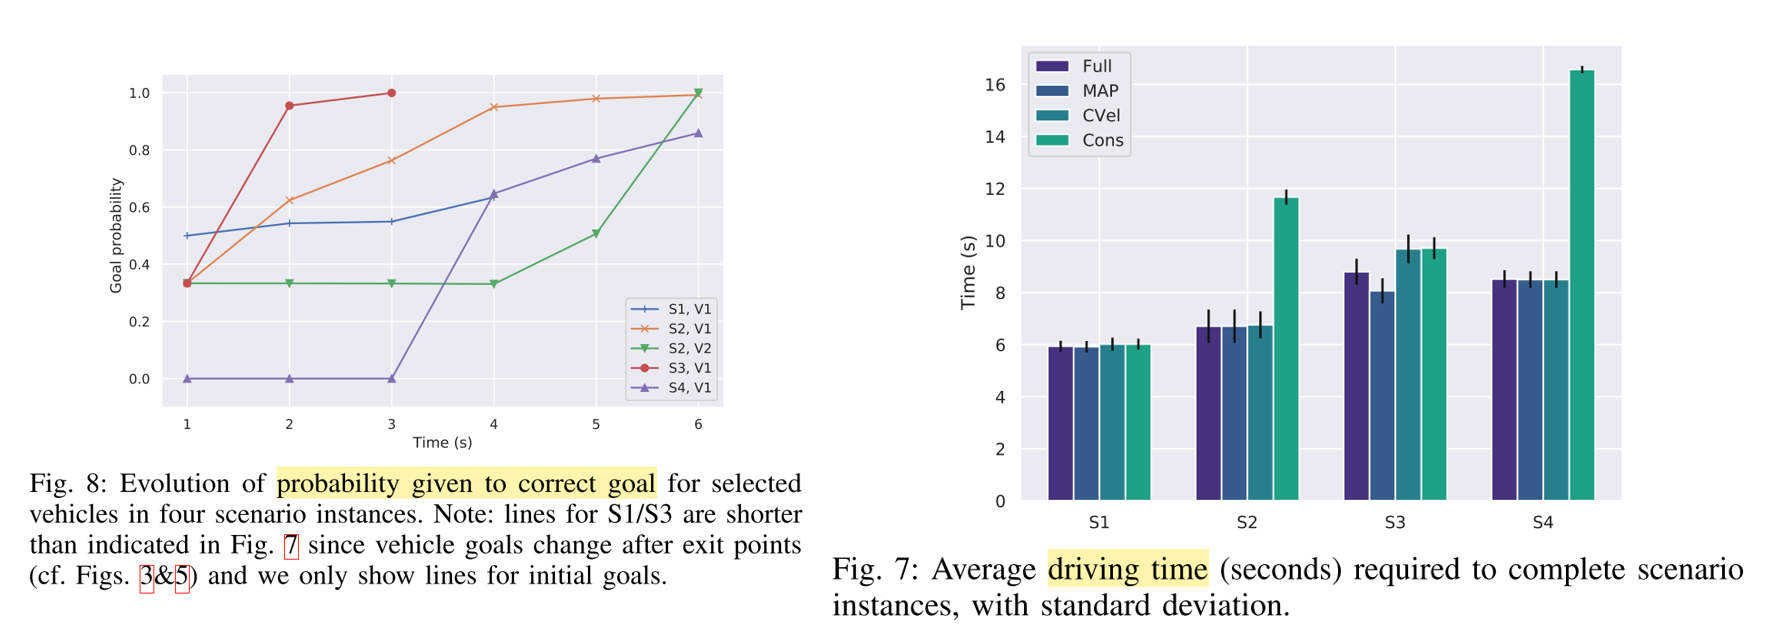 The ego-agent updates its belief on the goal follow by the other vehicles (left). As noted below, the ablation study (right) raises question about what really offers benefits for the time-efficiency of the driving policy. Source.